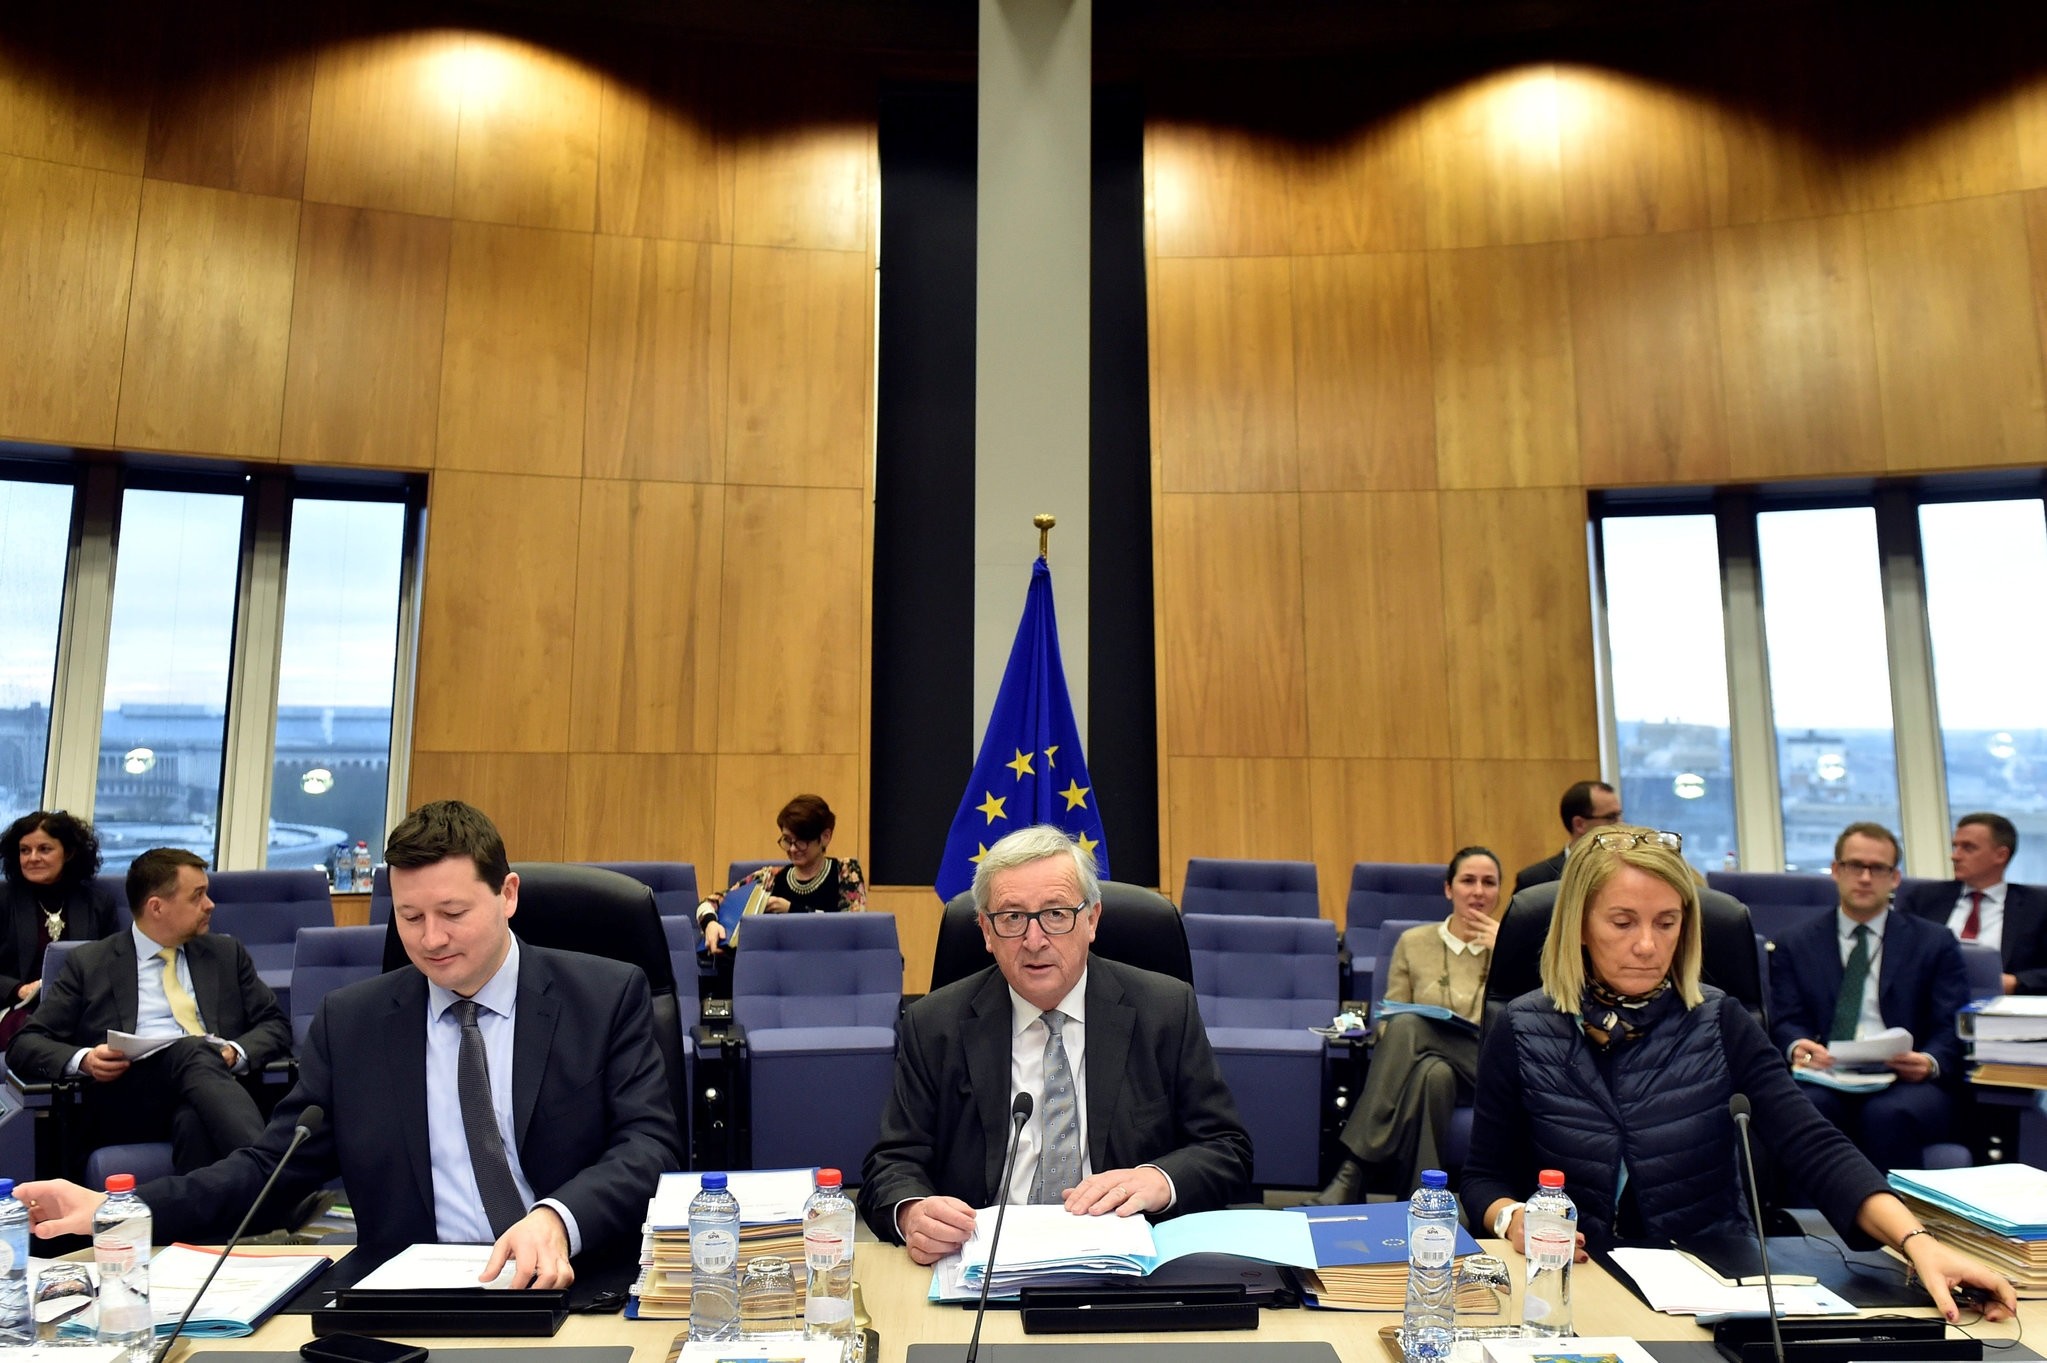 European Commission Secretary General Martin Selmayr, EC President Jean-Claude Juncker and Head of Cabinet of the President Clara Martinez Alberola meet with the College of Commissioners, in Brussels, March 7, 2018. (REUTERS Photo)